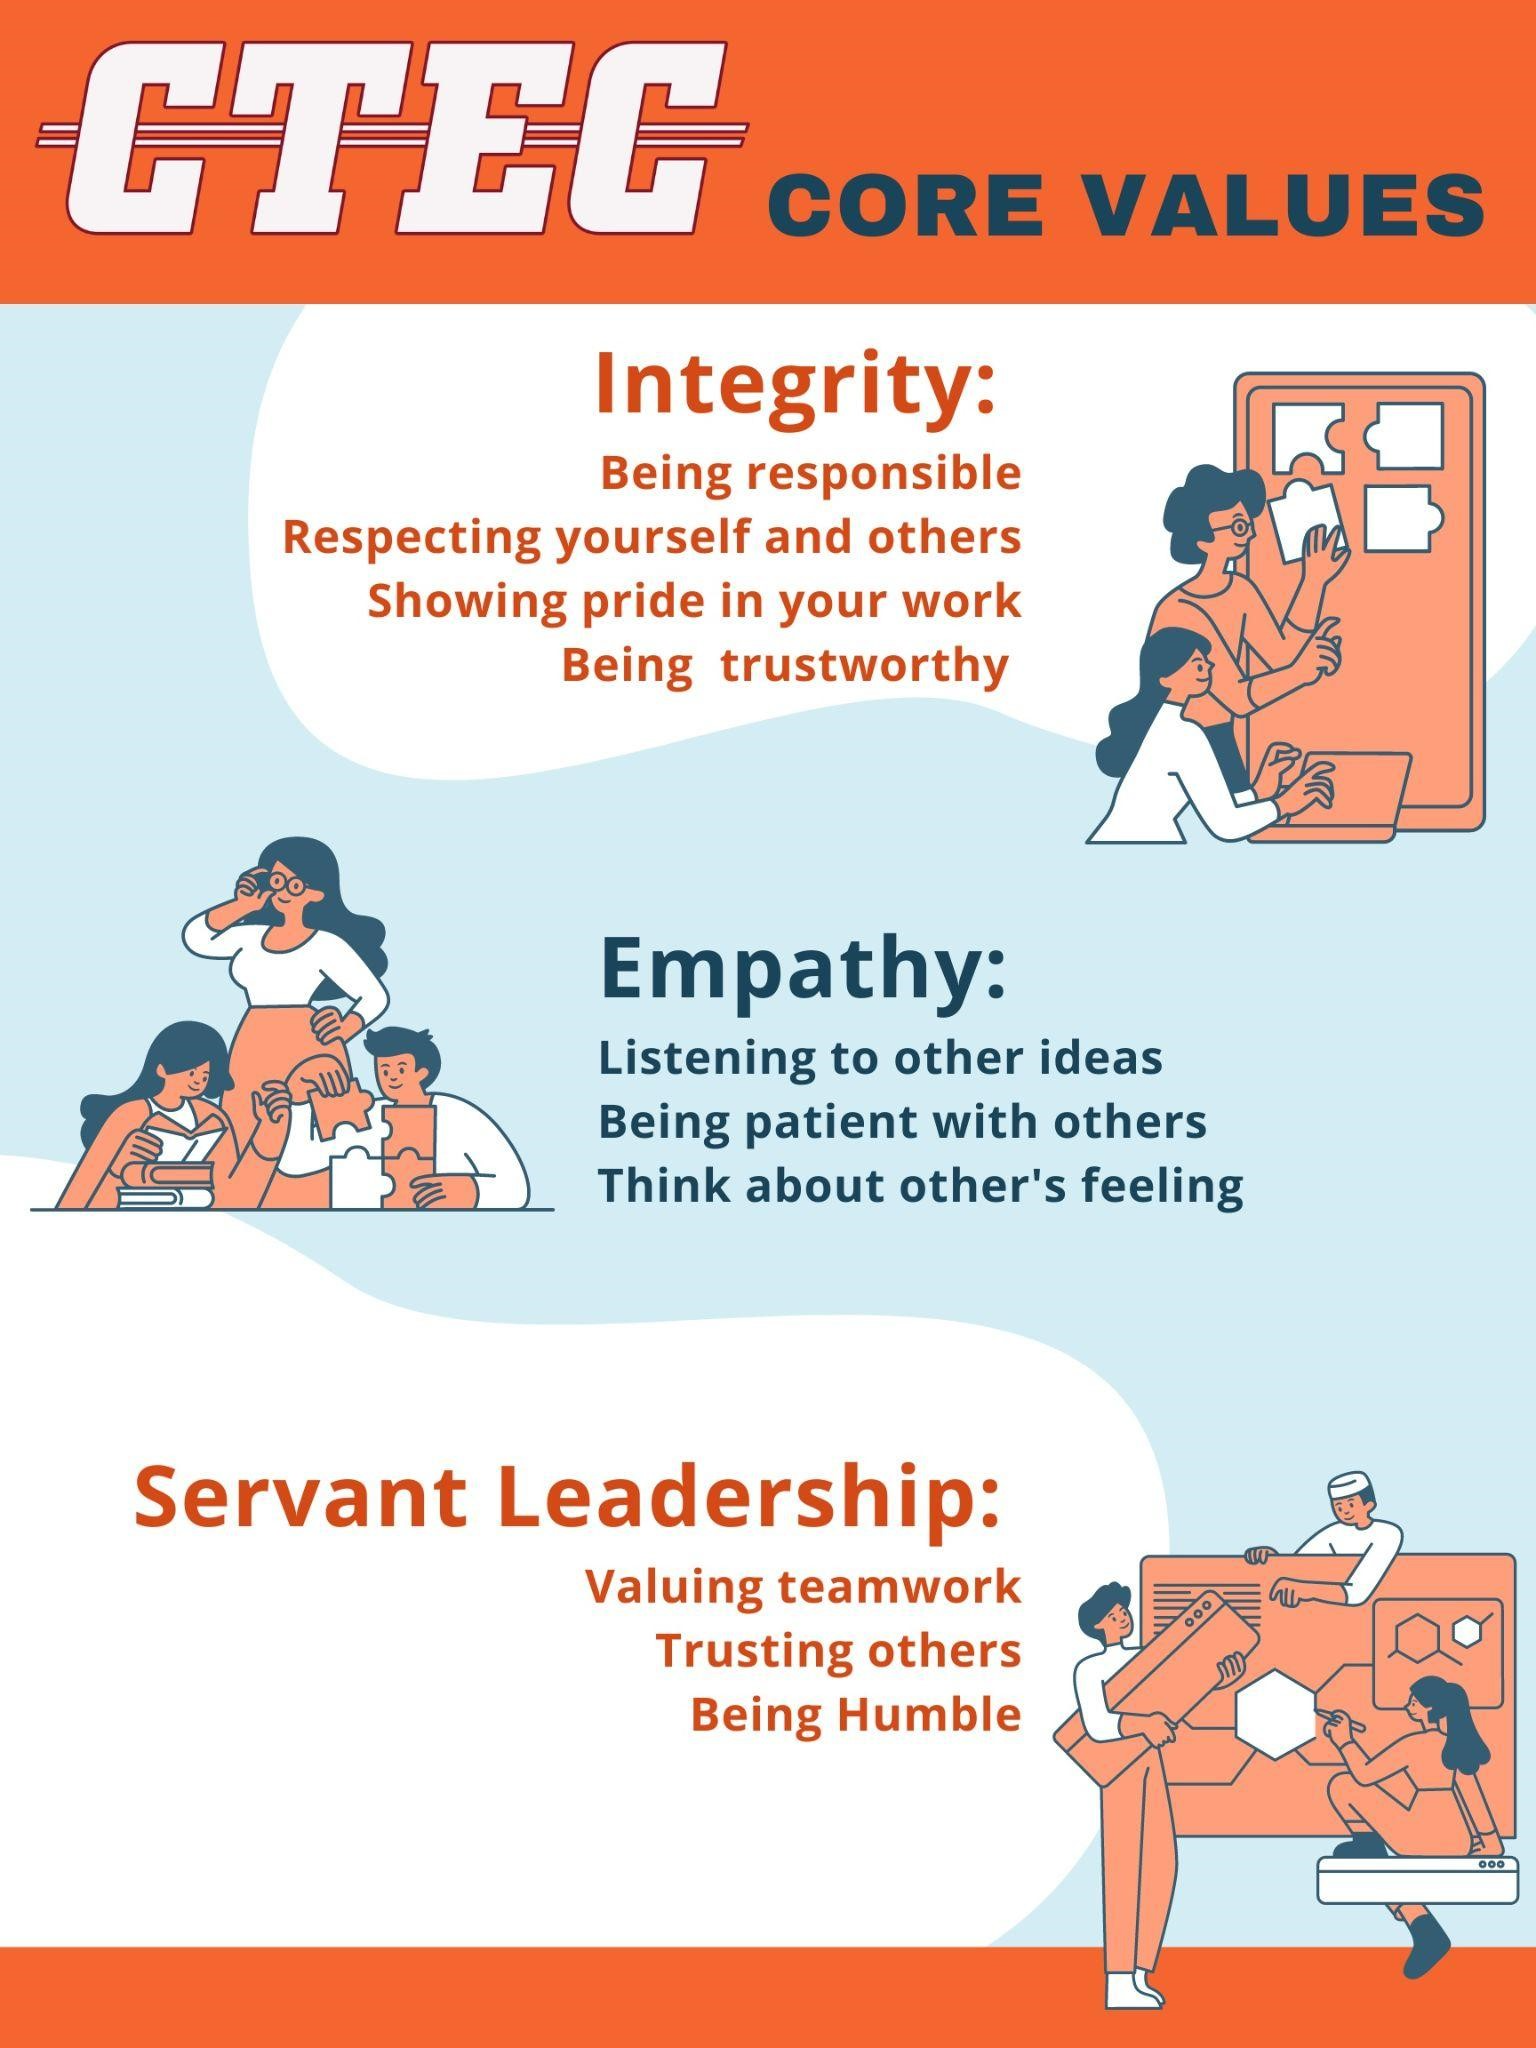 Informational graphic showing CTEC's Core Values with an orange top and bottom border, a blue and white sky background, and cartoon graphics showing the following: Integrity:  Being responsible Respecting yourself and others Showing pride in your work Being trustworthy, Empathy: Listening to other ideas Being patient with others Think about other's feelings, Servant leadership:  Valuing teamwork Trusting others Being Humble.